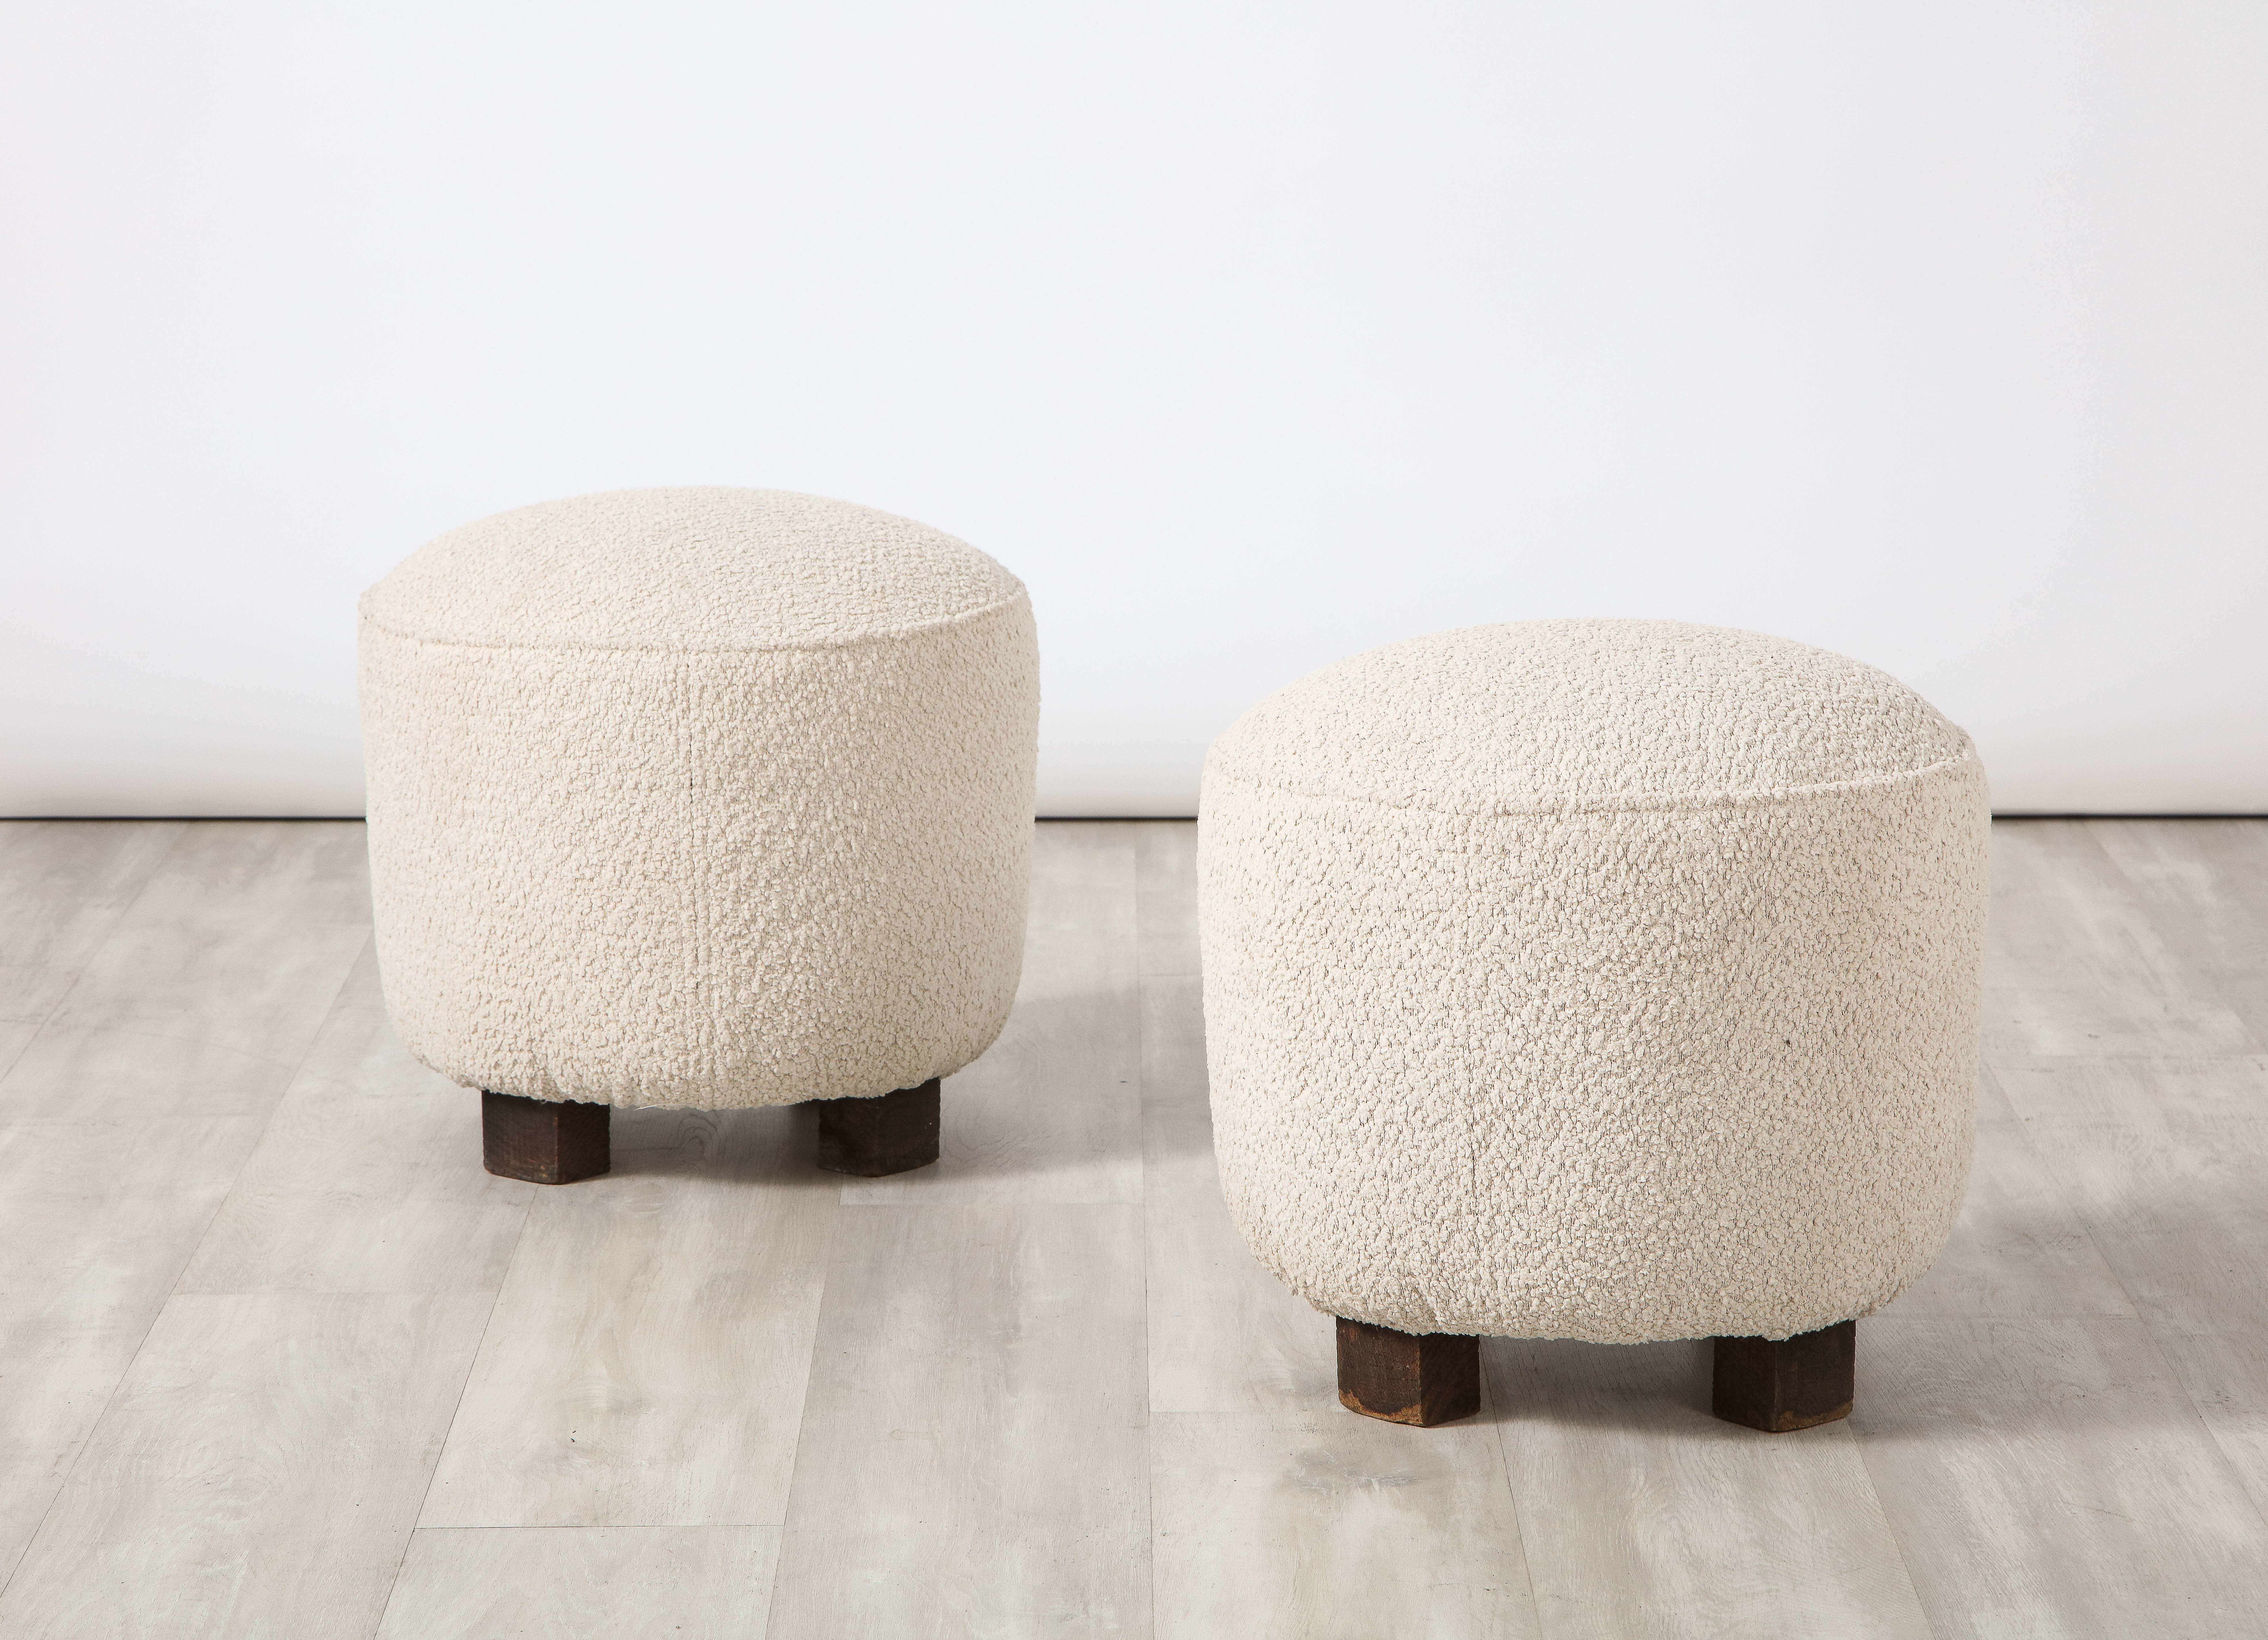 A wonderful pair of Italian Organic Modern circular stools, upholstered in a creamy white wool boucle, supported on three rough hewn wooden feet. Perfect for pulling up fireside in the city or the country! 
Northern Italian, circa 1960 
Size: 17